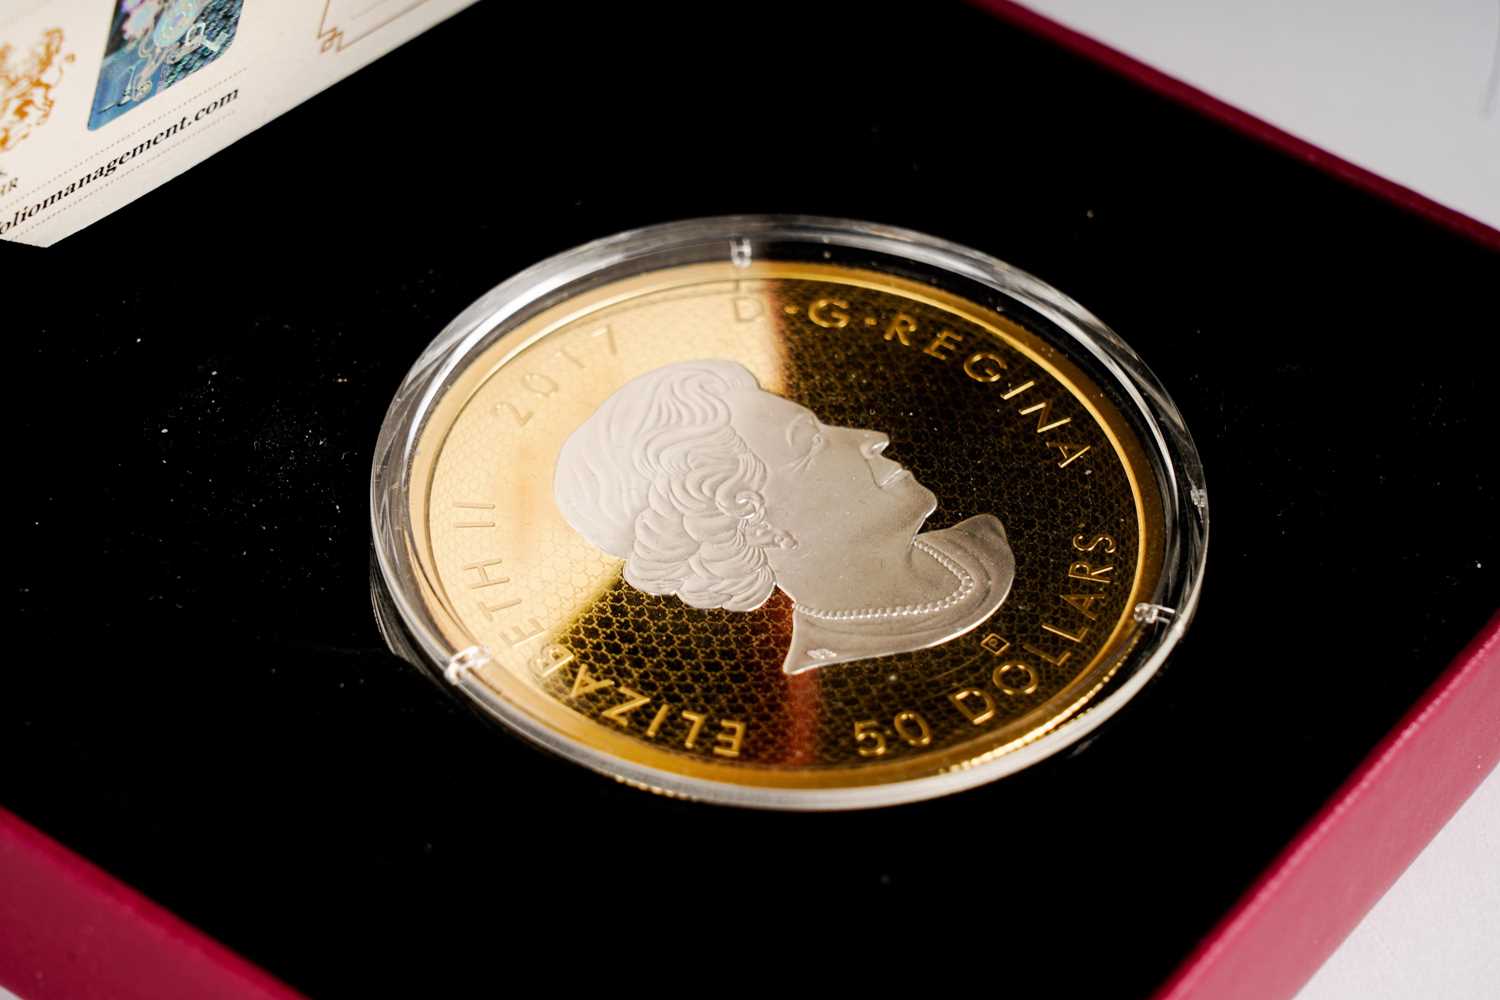 The Royal Canadian Mint Queen Elizabeth II $50 dollar silver proof coin - Image 2 of 3